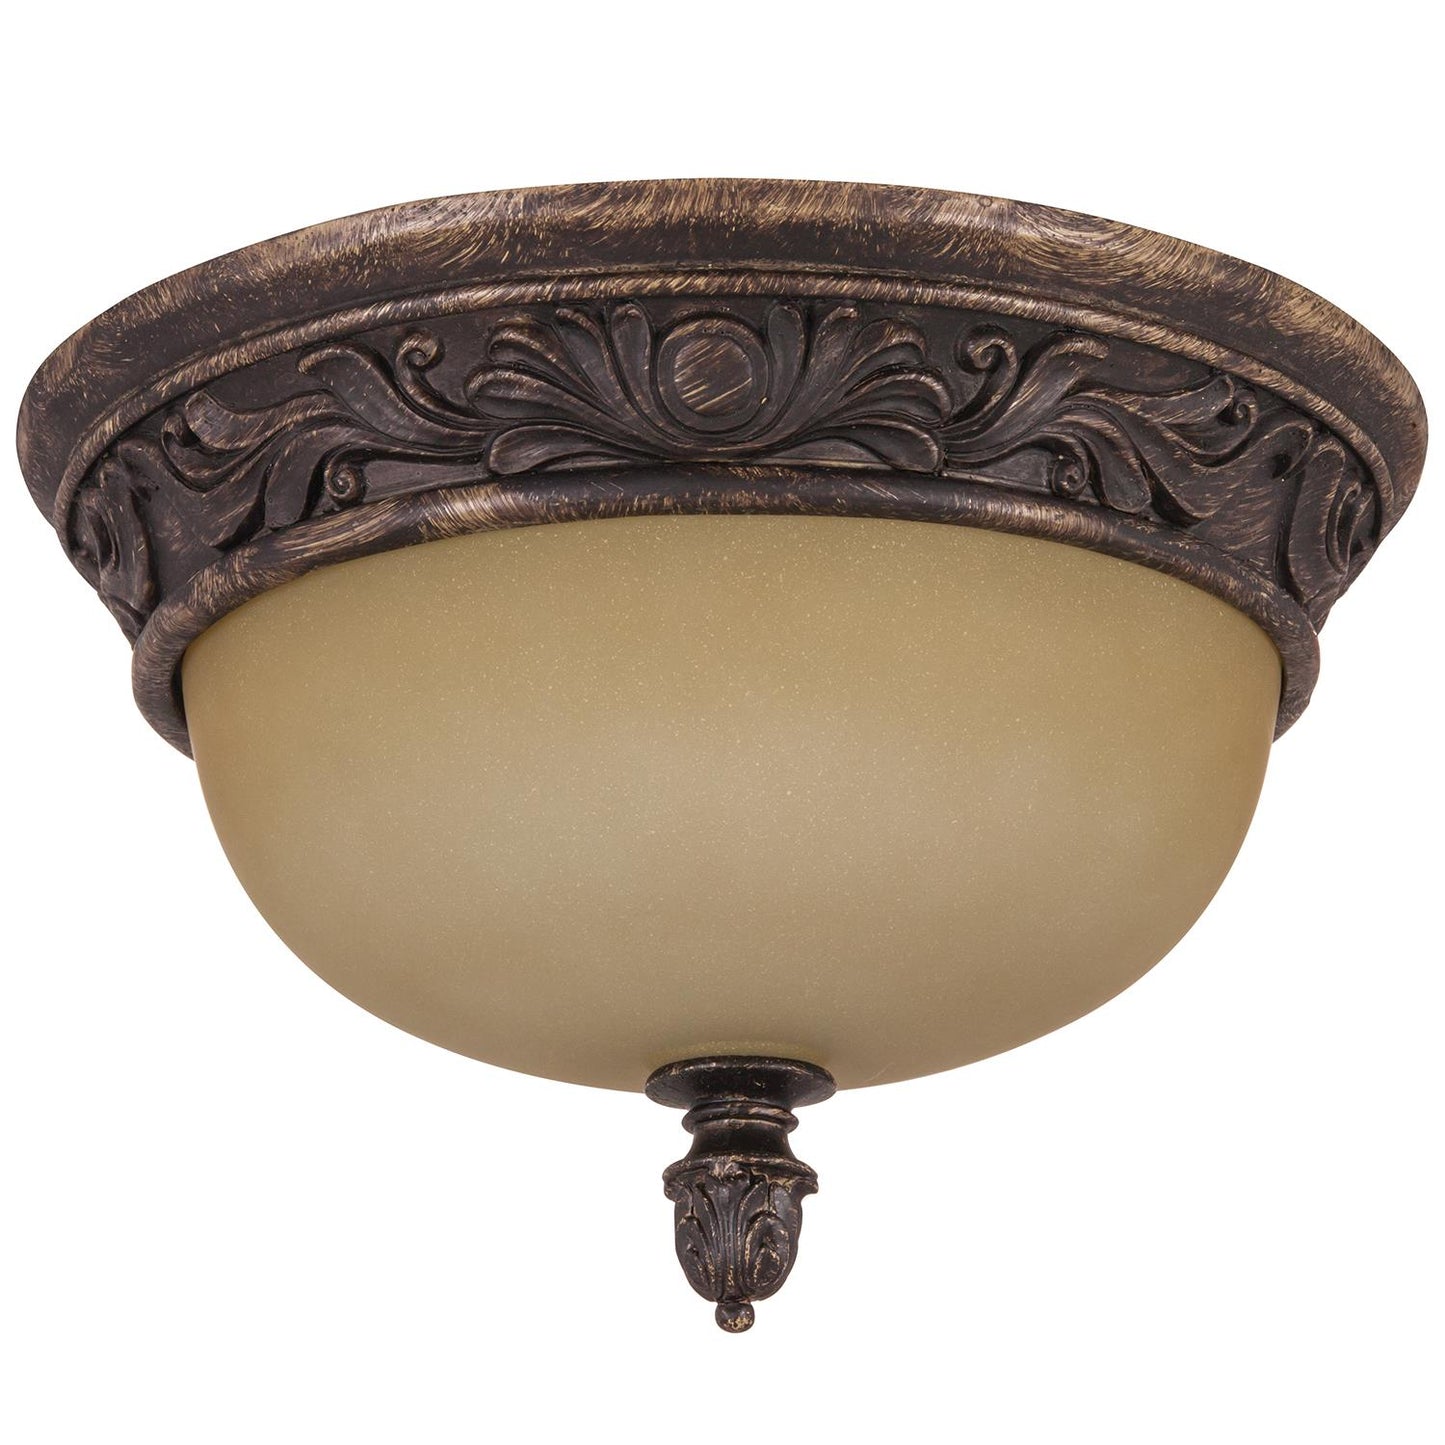 Sunlite 13" Decorative Dome Ceiling Fixture, Antique Brown Finish, Tea Stained Glass